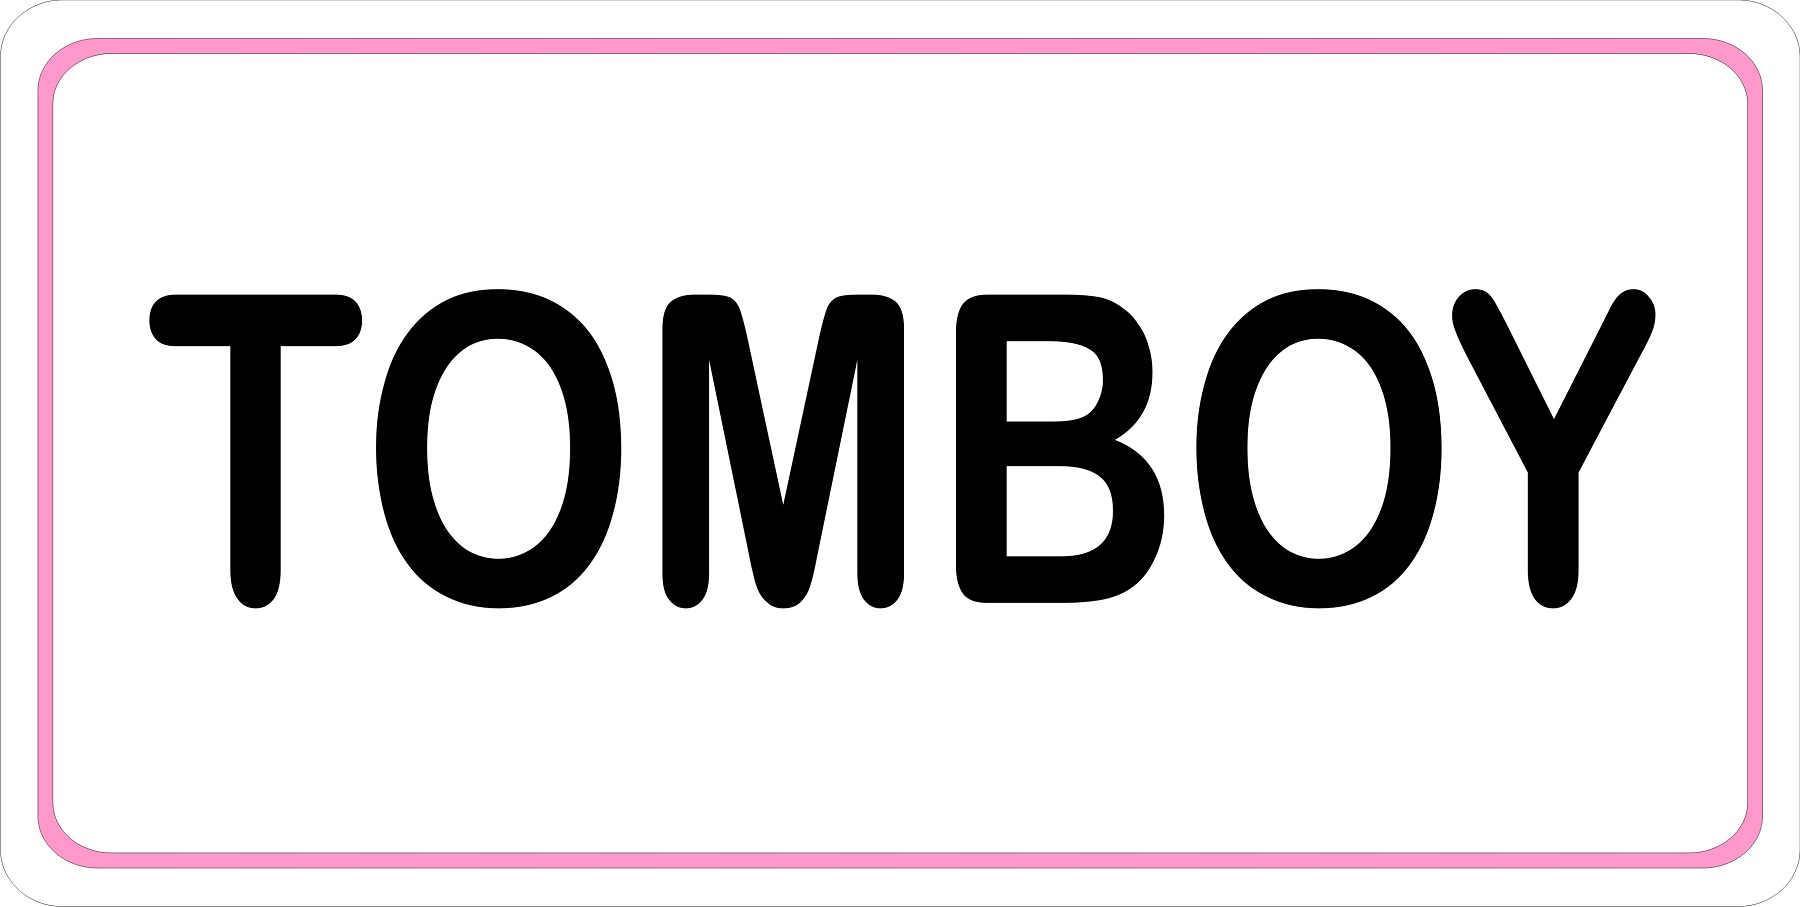 Tomboy On White Photo License Plate